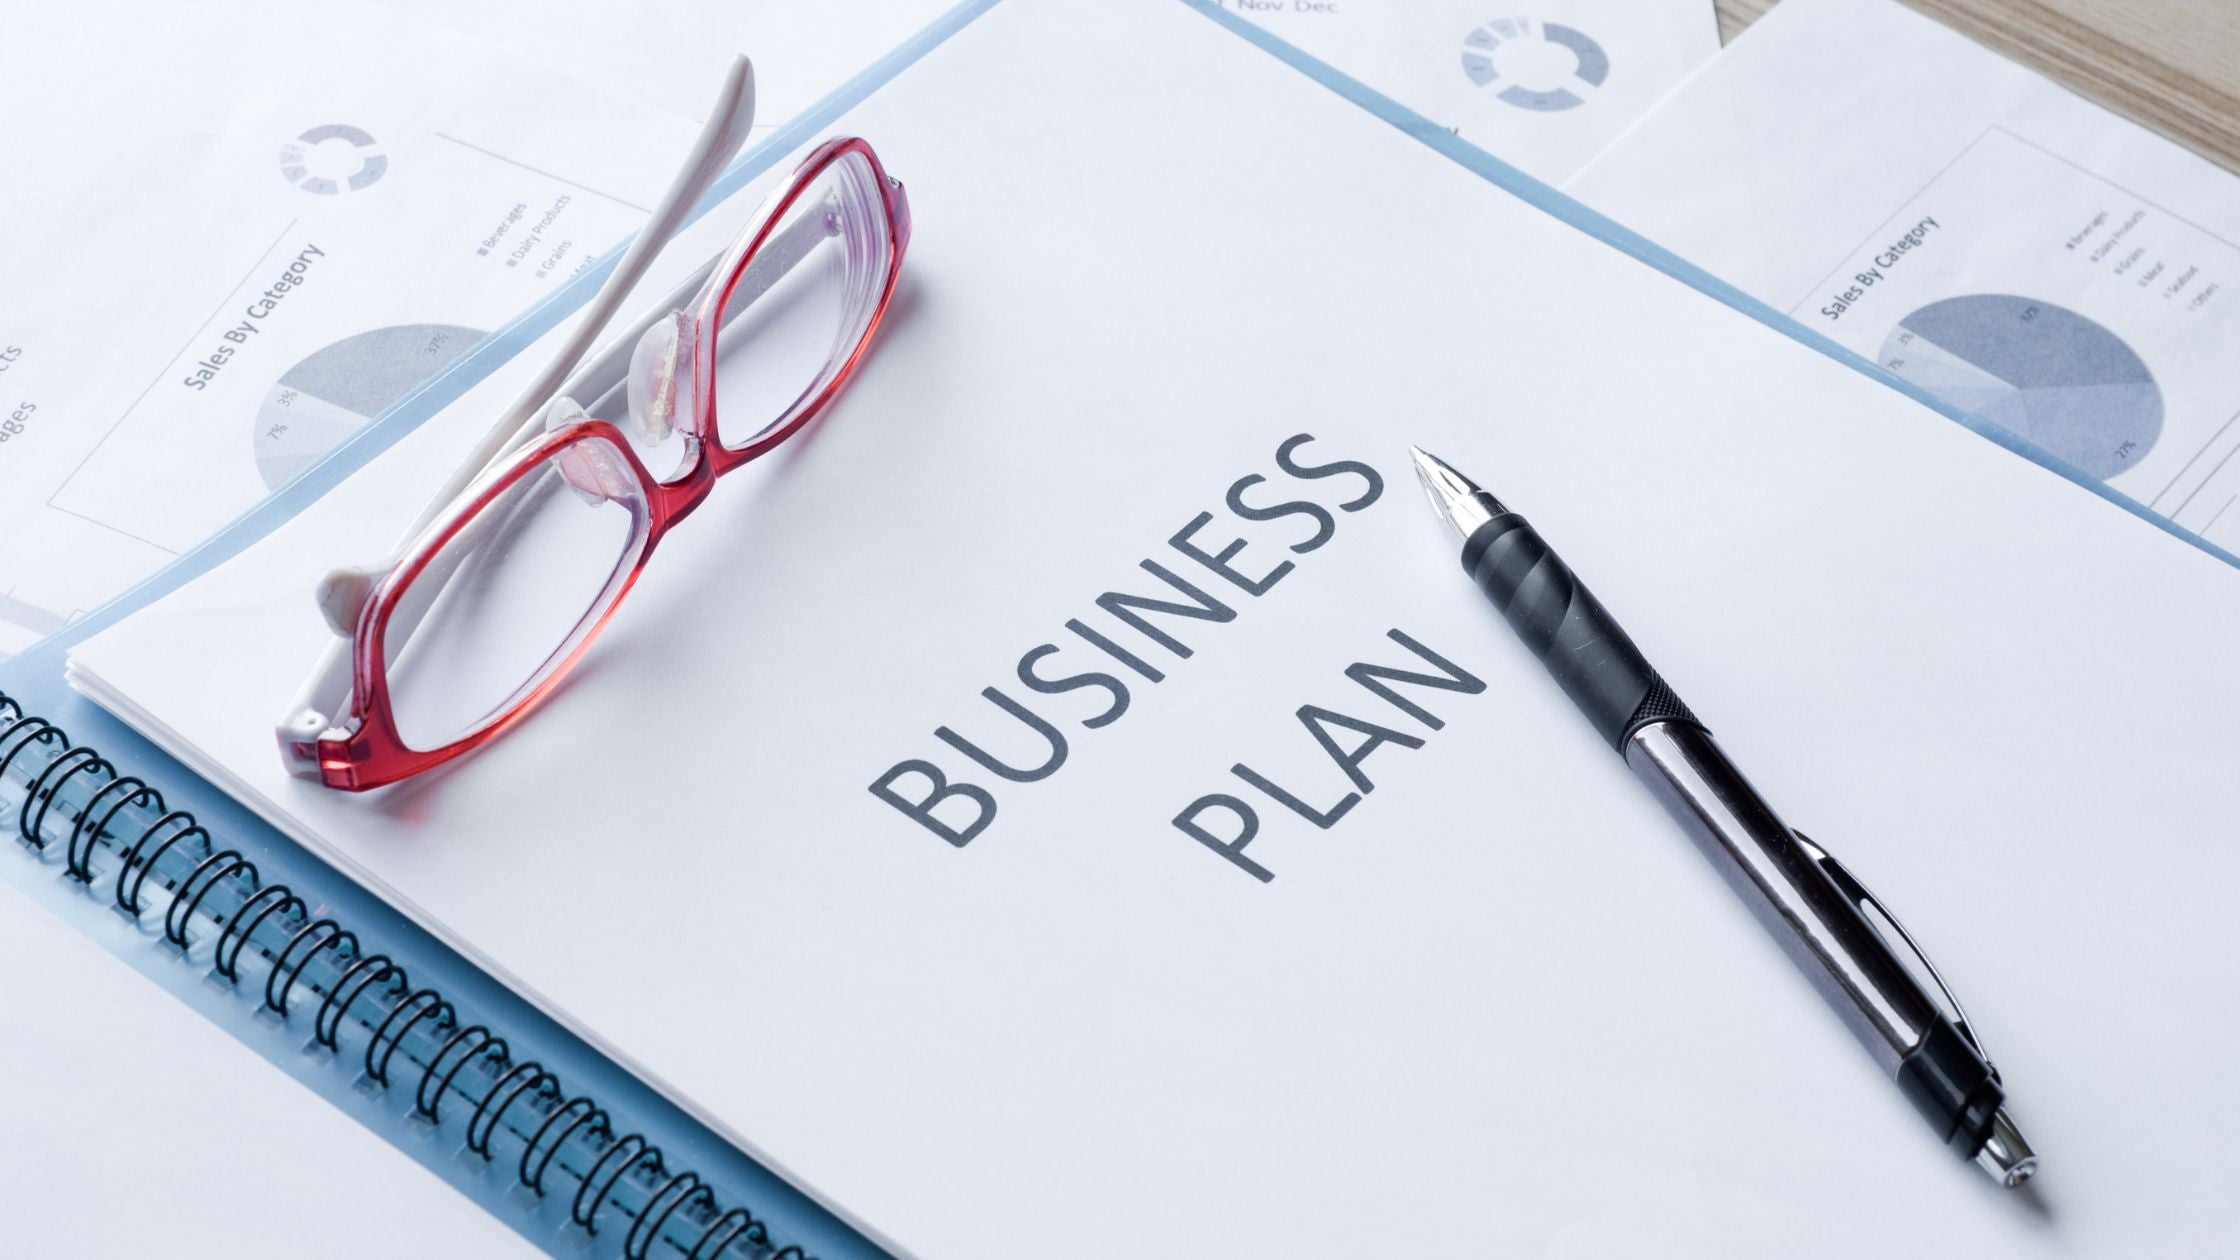 Business plan notebook with pen and glasses